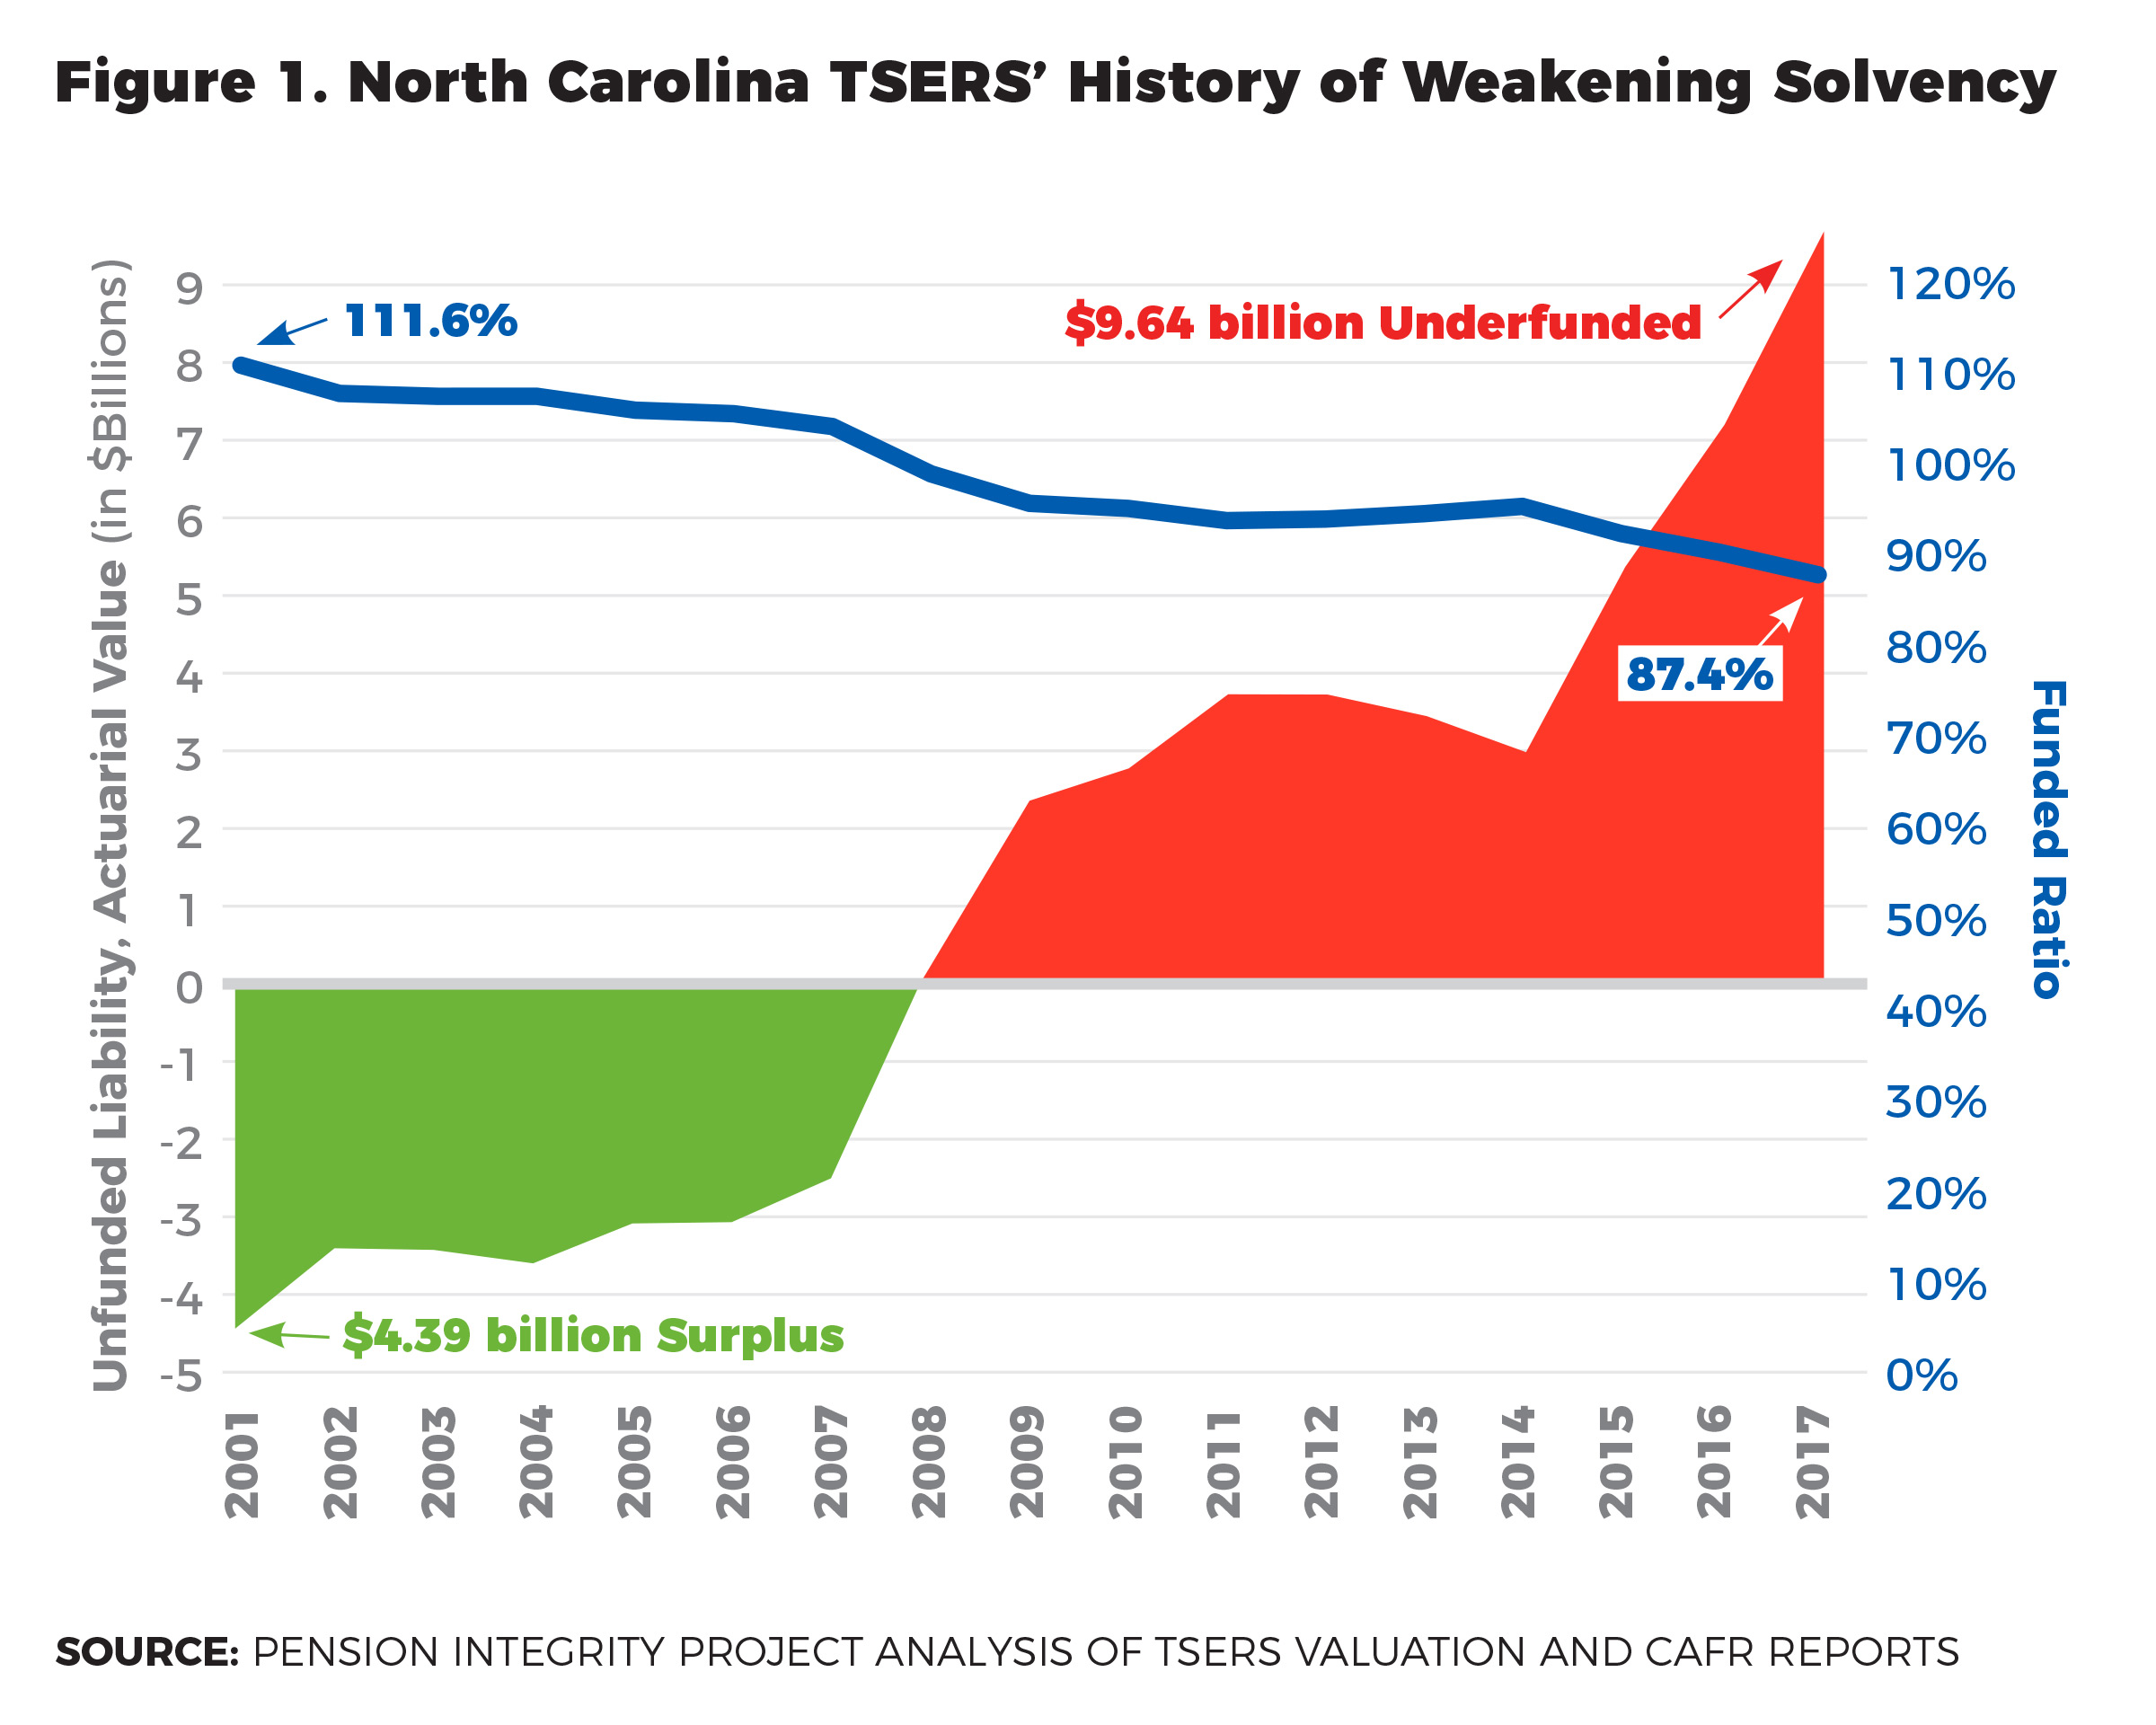 Growth in TSERS Pension Debt Outpacing North Carolina GDP Growth